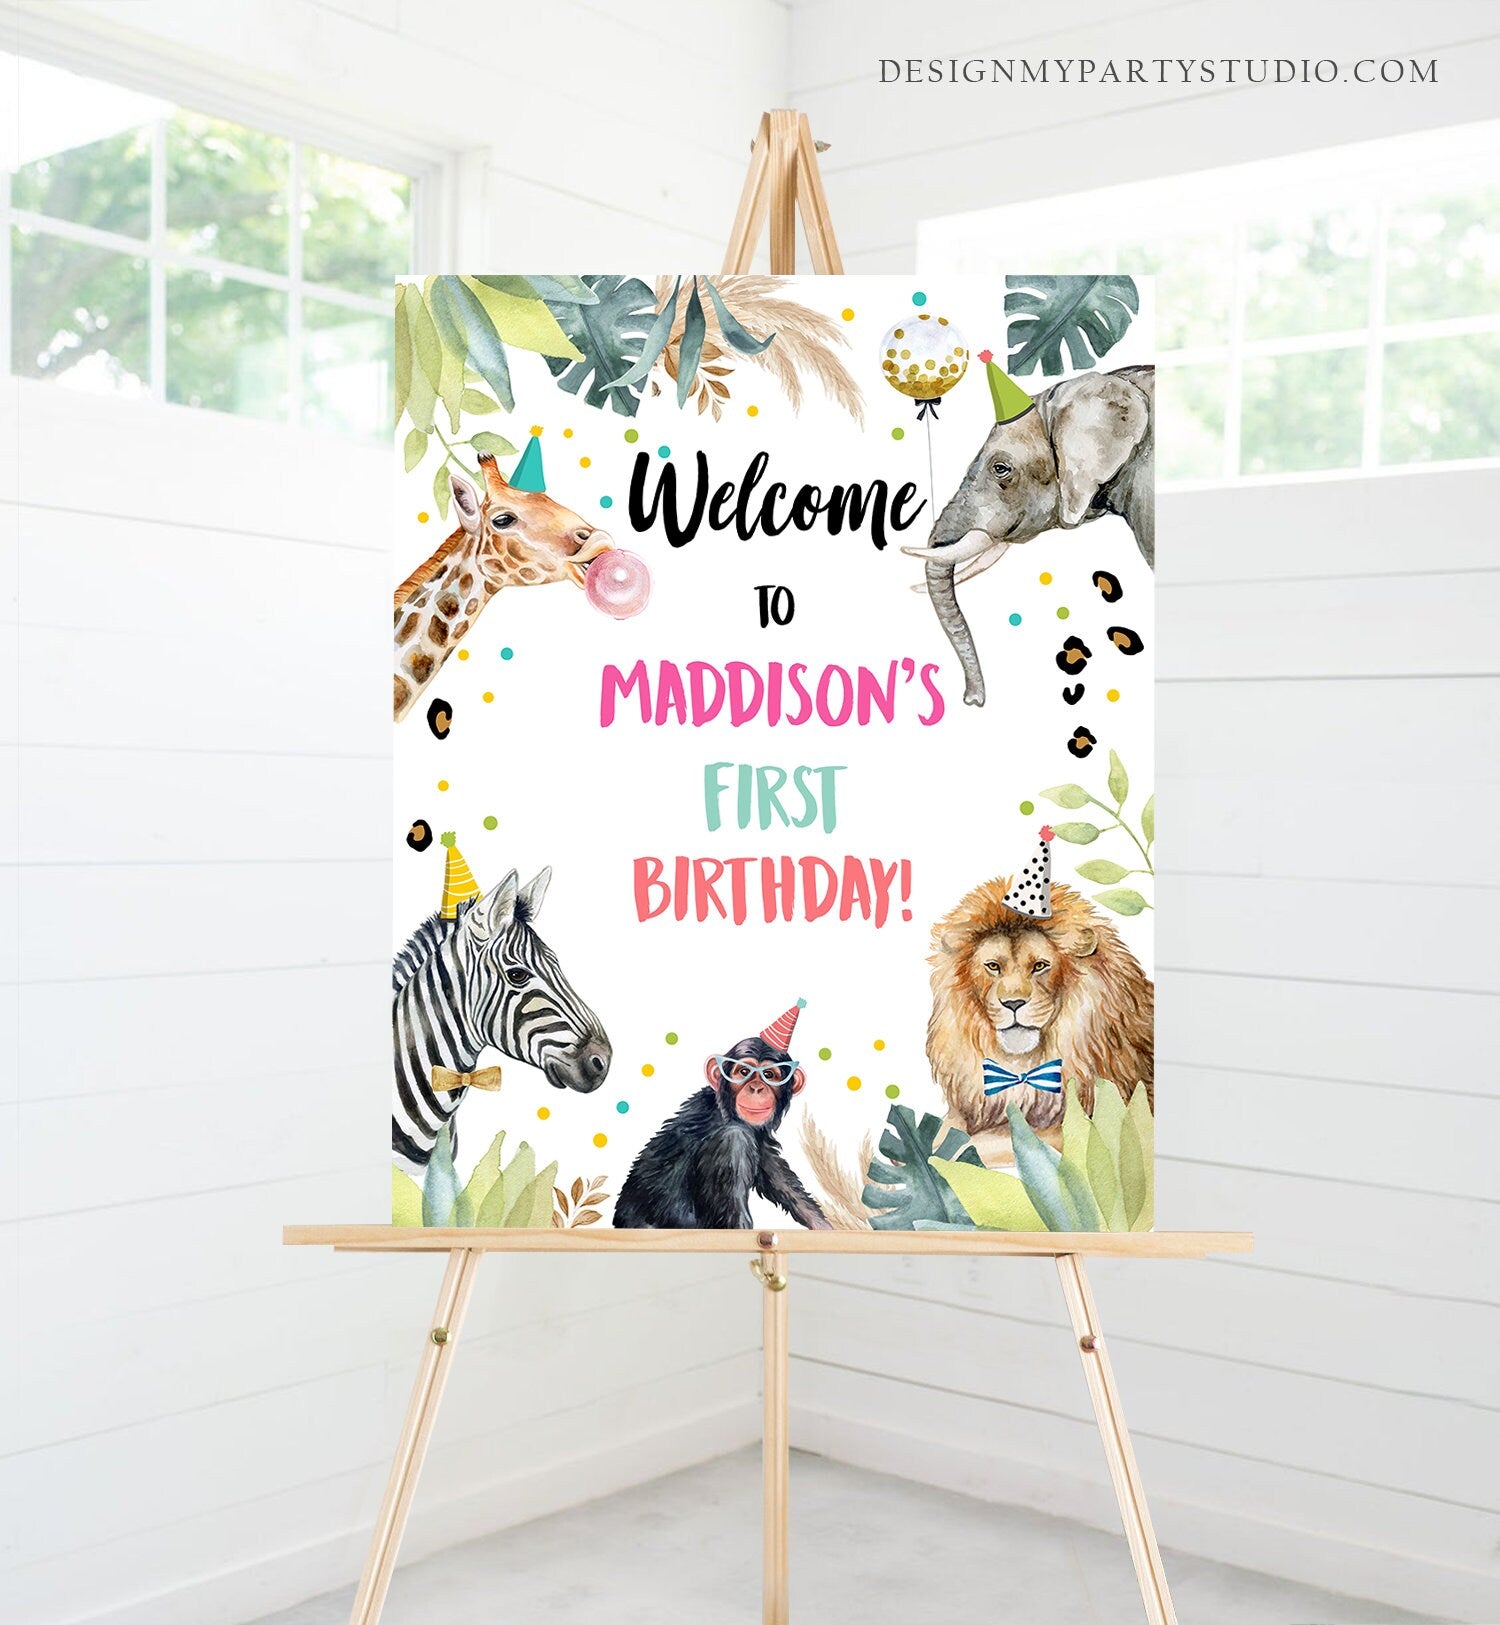 Editable Party Animals Welcome Sign Party Animal Sign Zoo Safari Welcome Jungle Sign Birthday Animals Girl Template PRINTABLE Corjl 0417